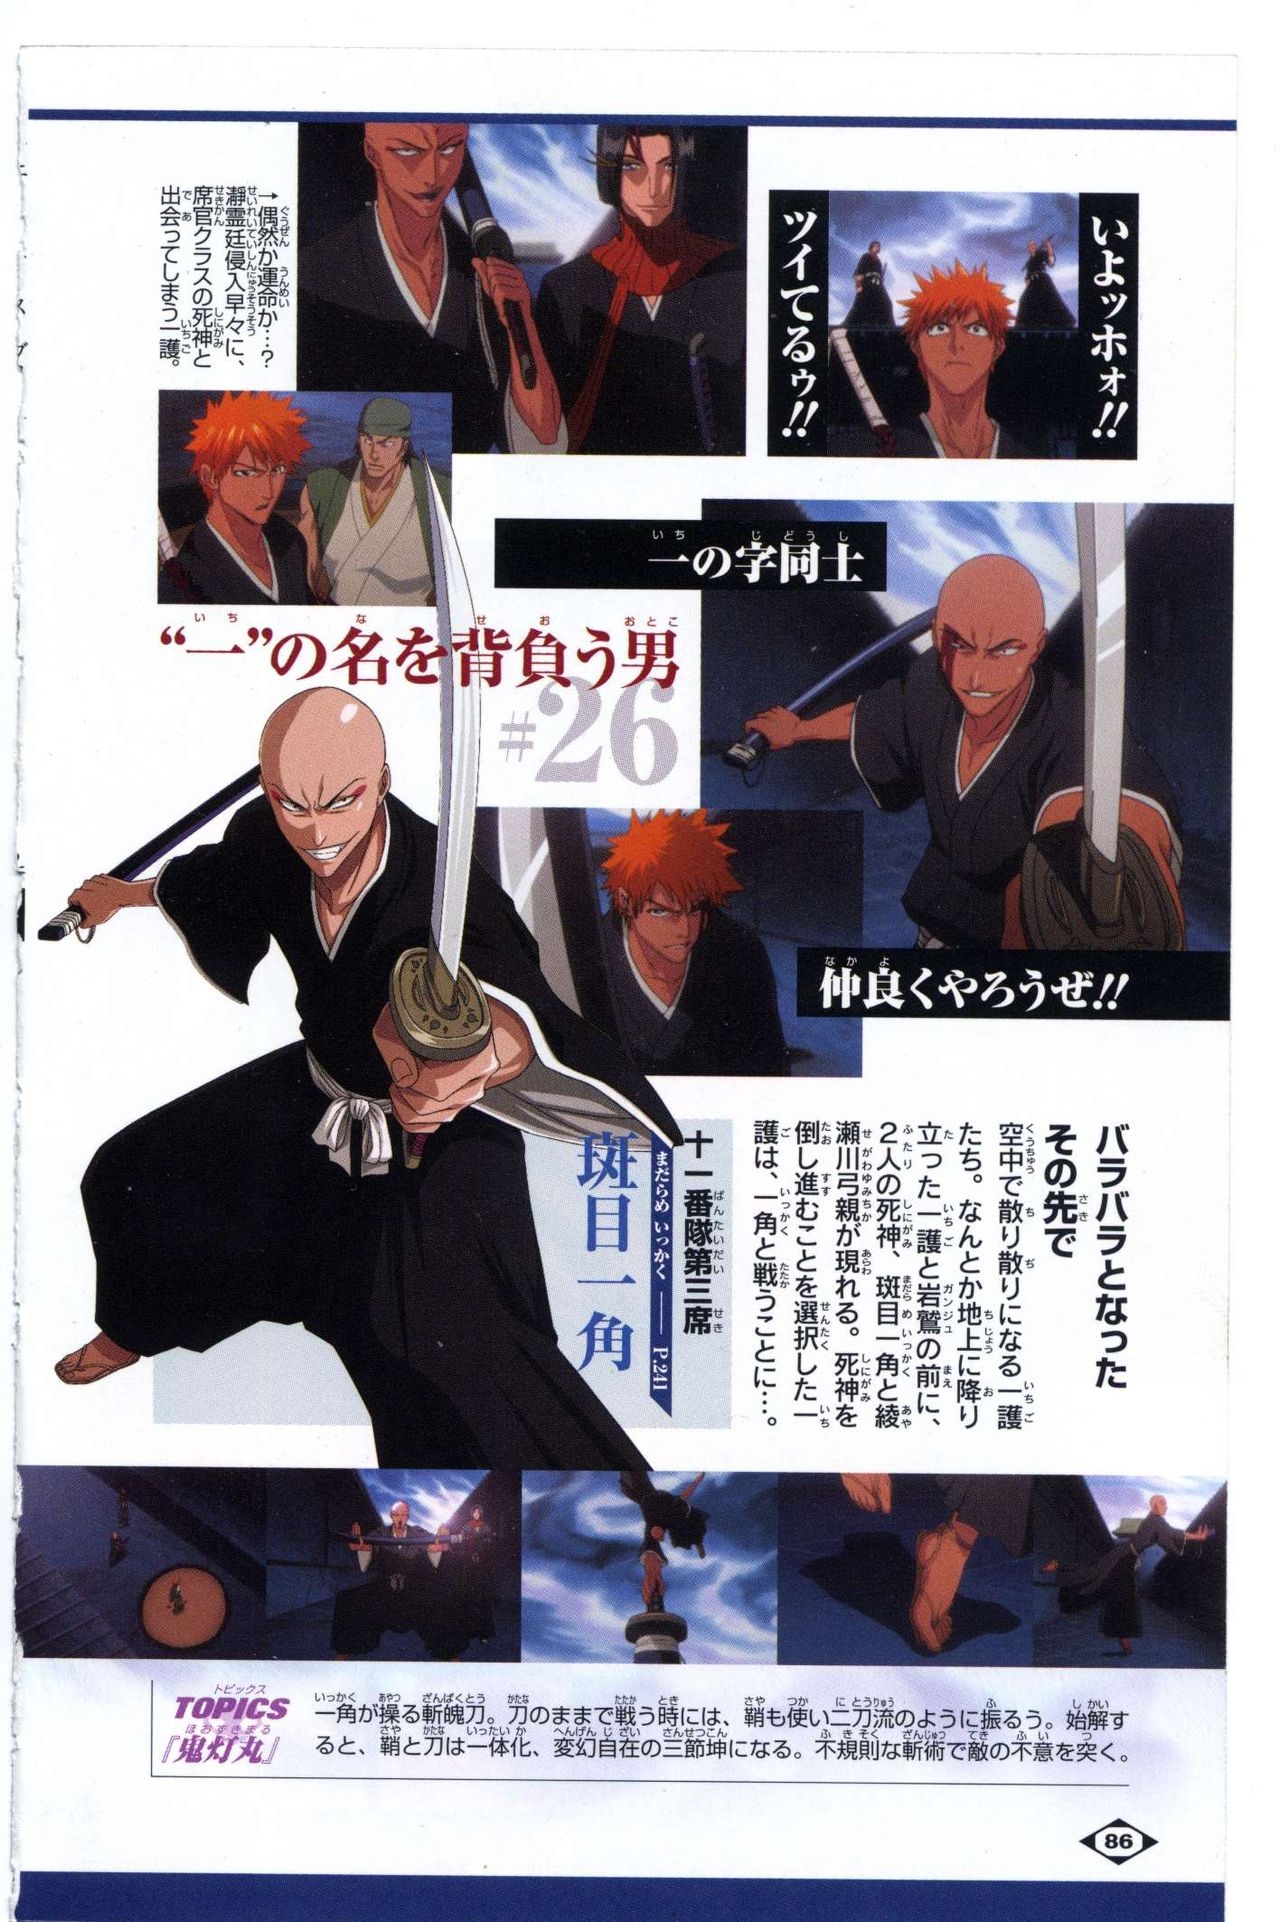 Bleach: Official Animation Book VIBEs 86